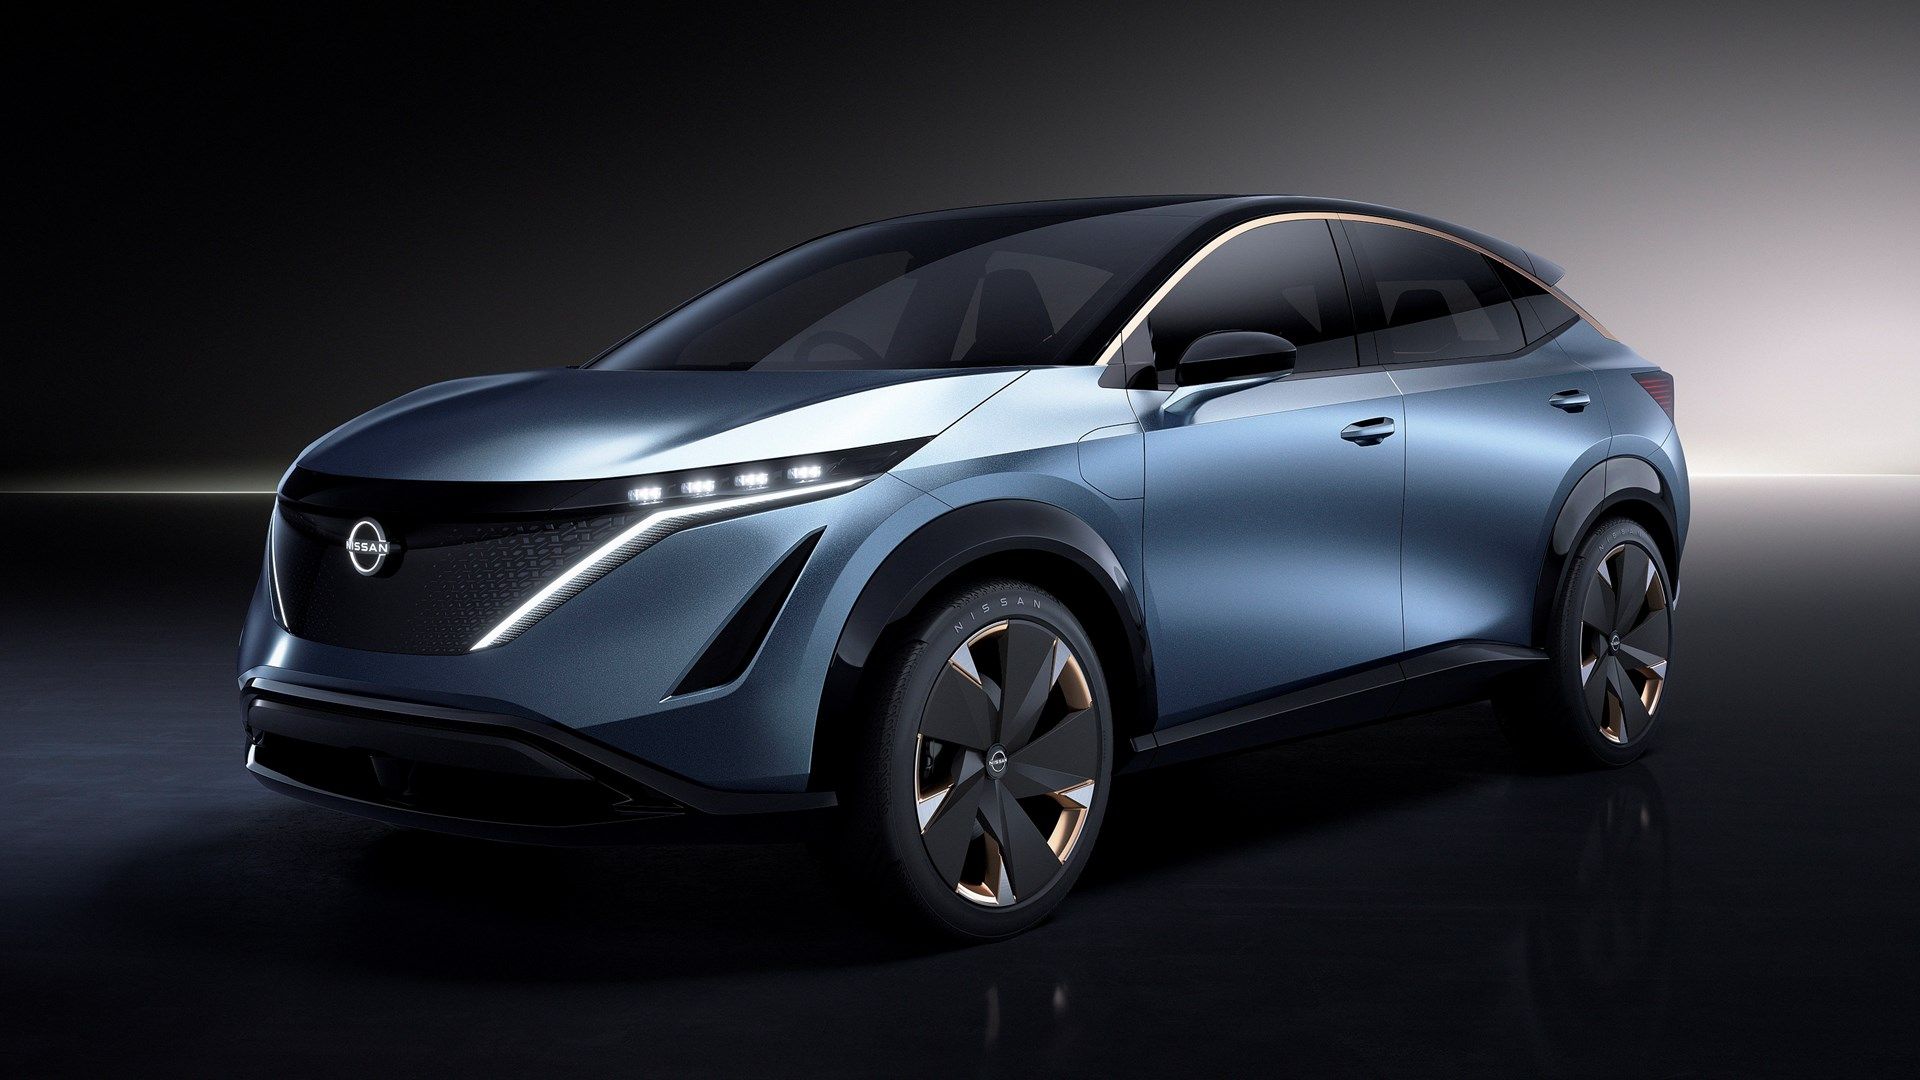 Nissan's Next Electric Car Likely to Get AWD